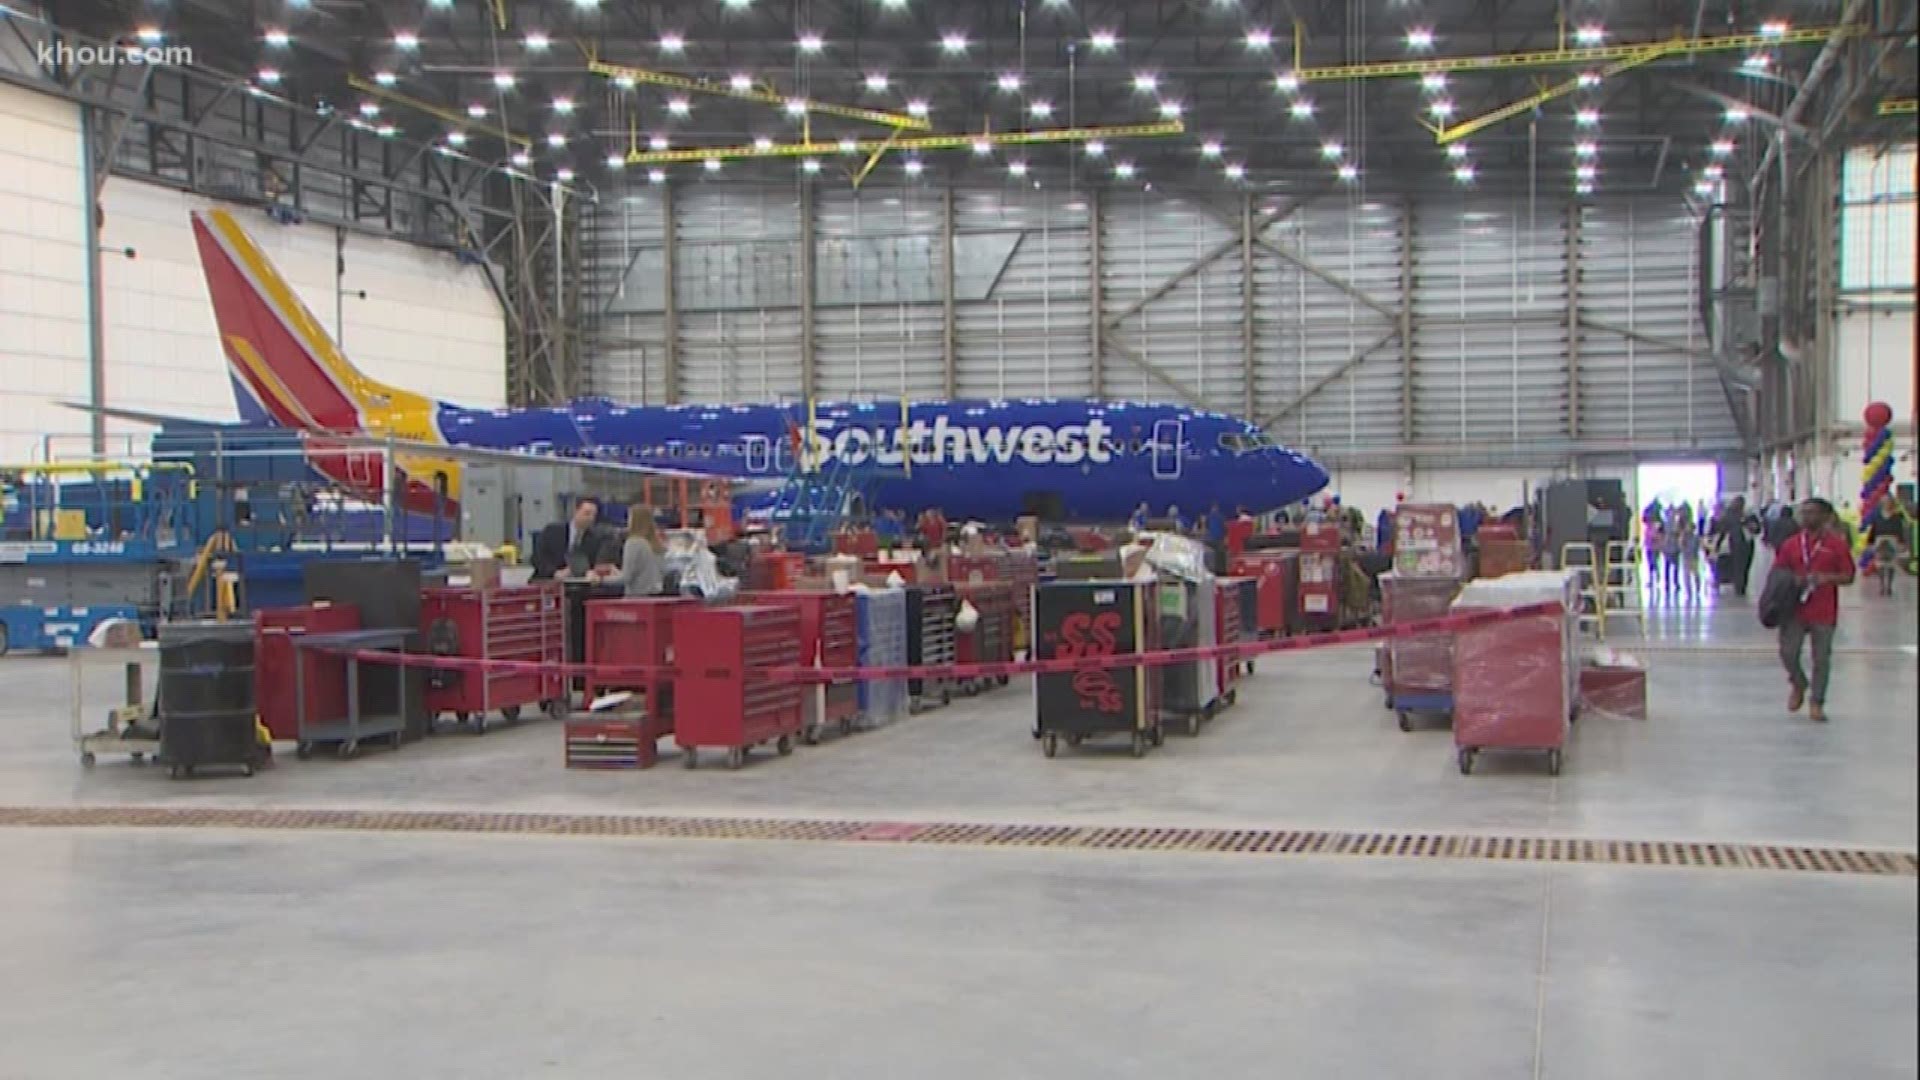 Southwest Airlines just opened the company's biggest maintenance